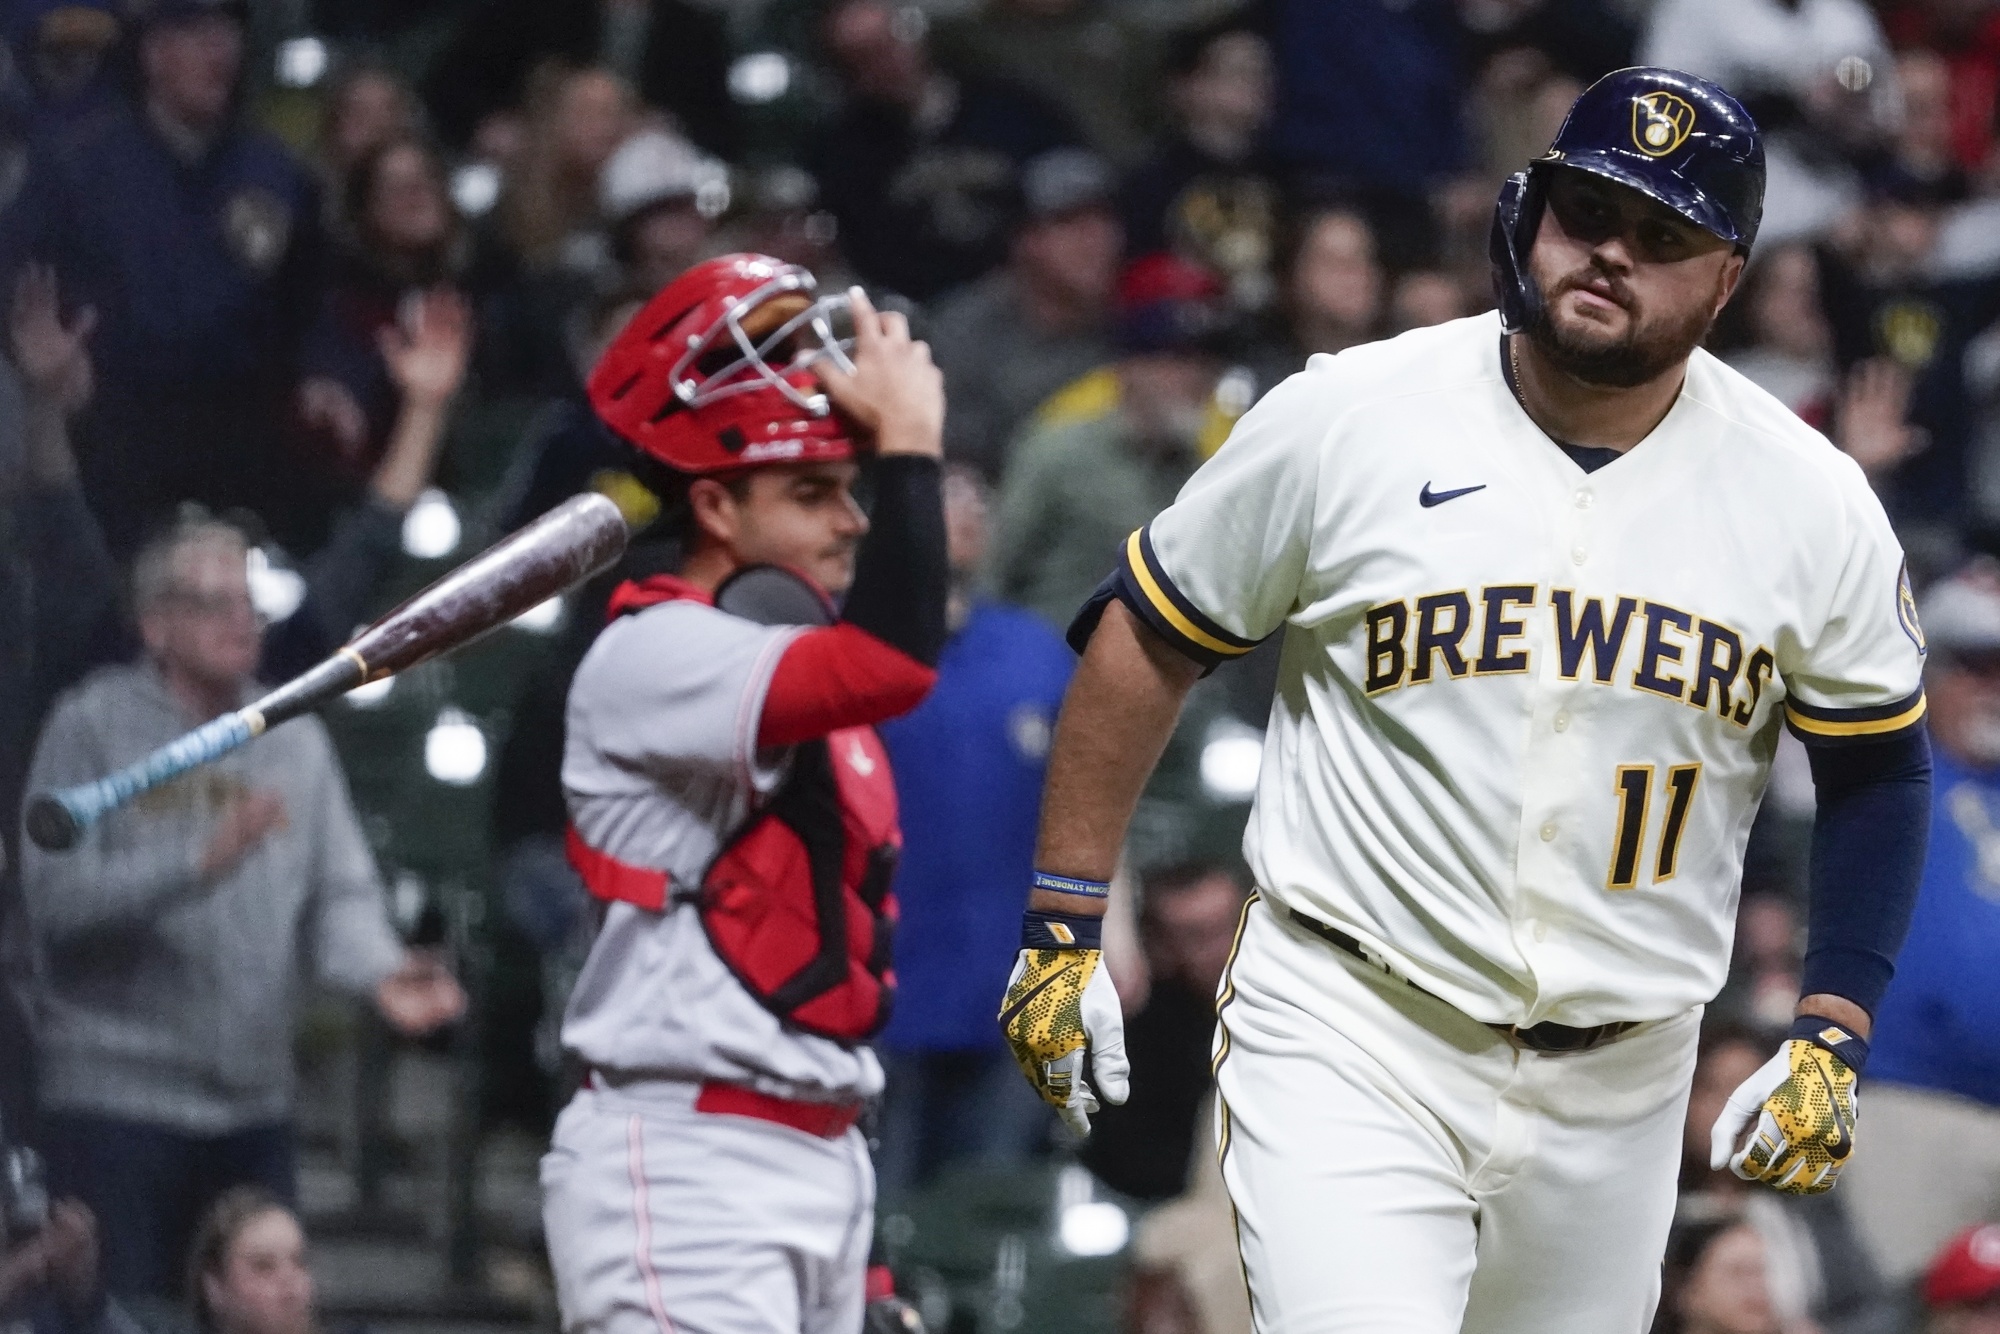 Tellez Sets Brewers Record With 8 RBIs in 18-4 Rout of Reds - Bloomberg